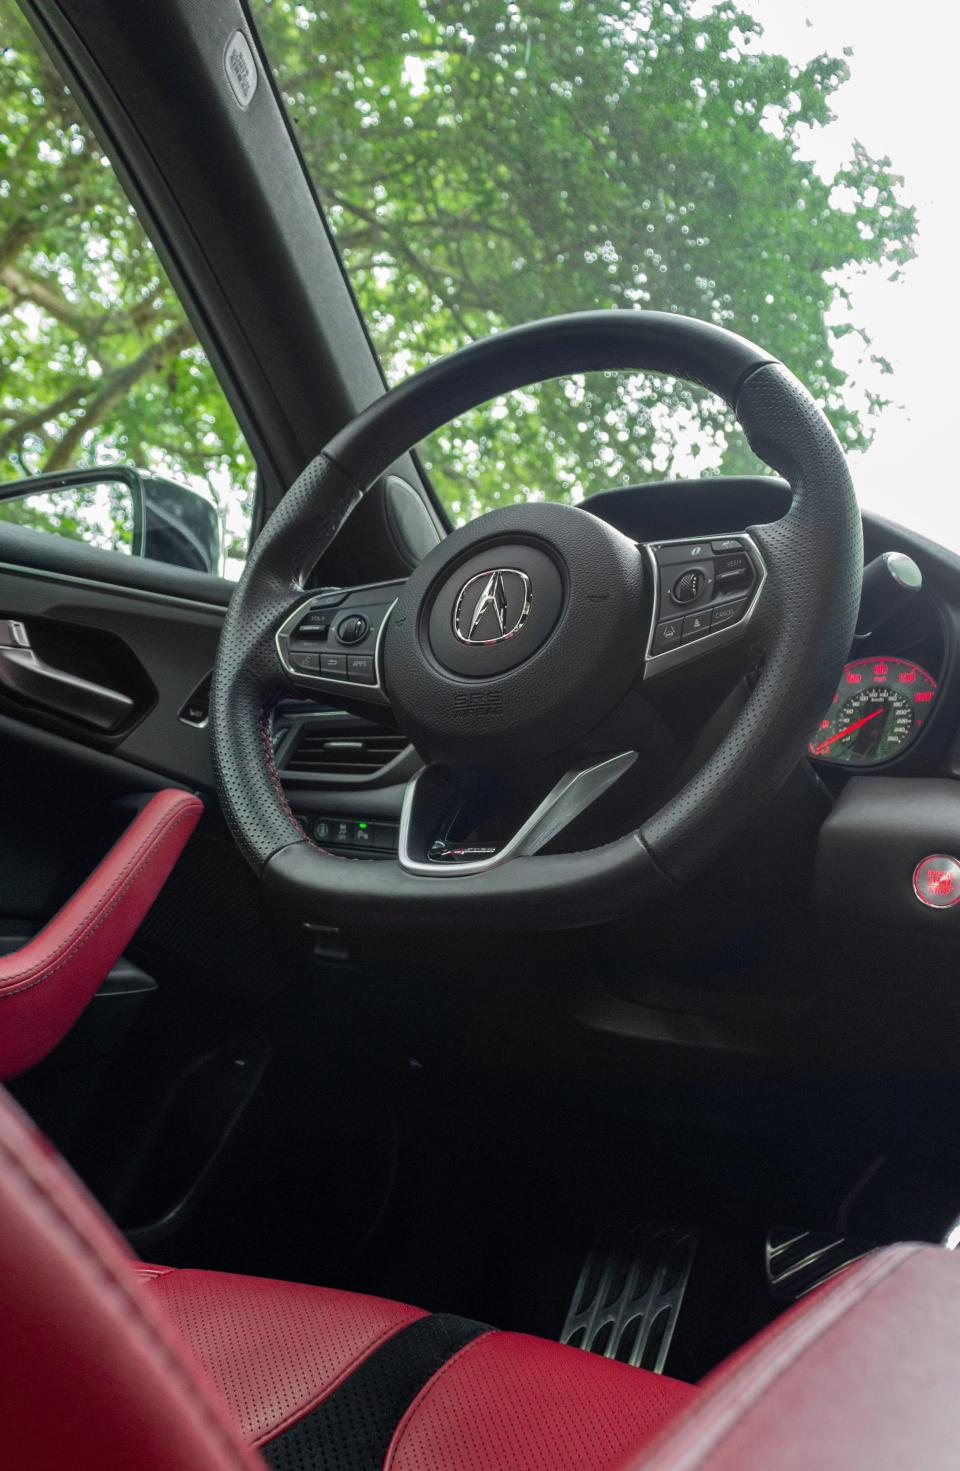 The 2021 Acura TLX A-Spec's steering wheel.